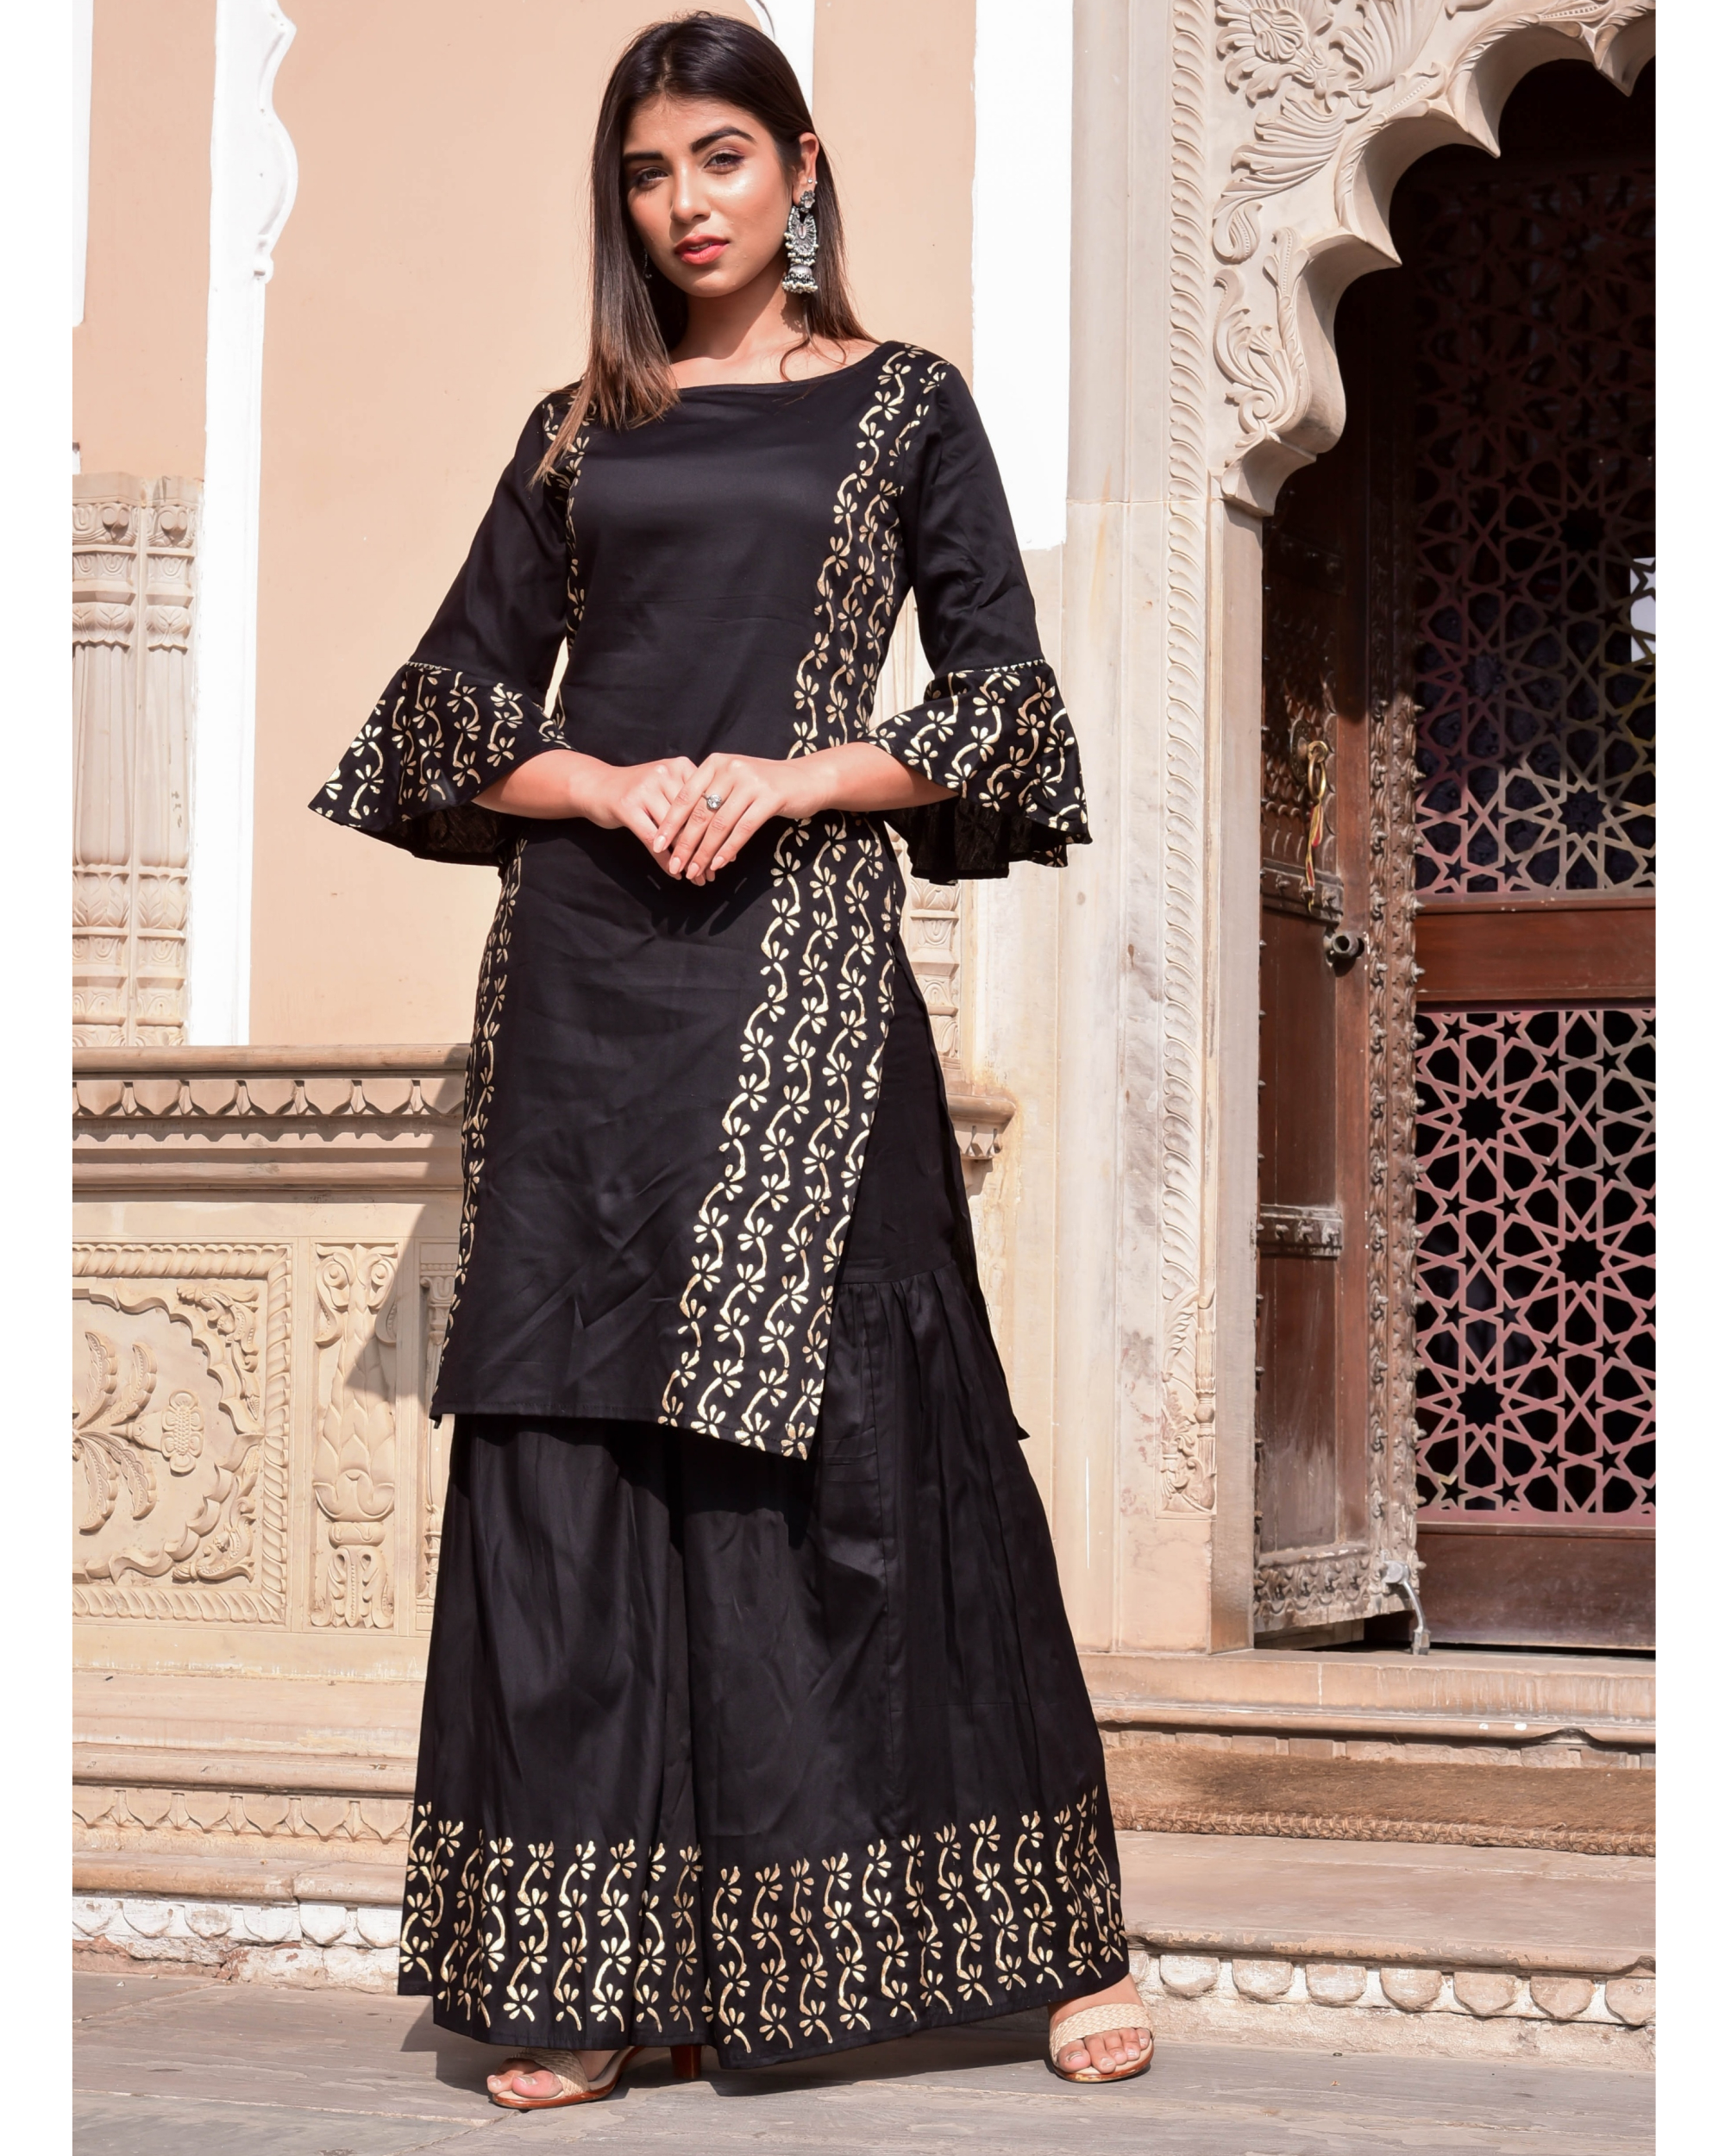 Shop Black Sharara Pants for Women Online from India's Luxury Designers 2023